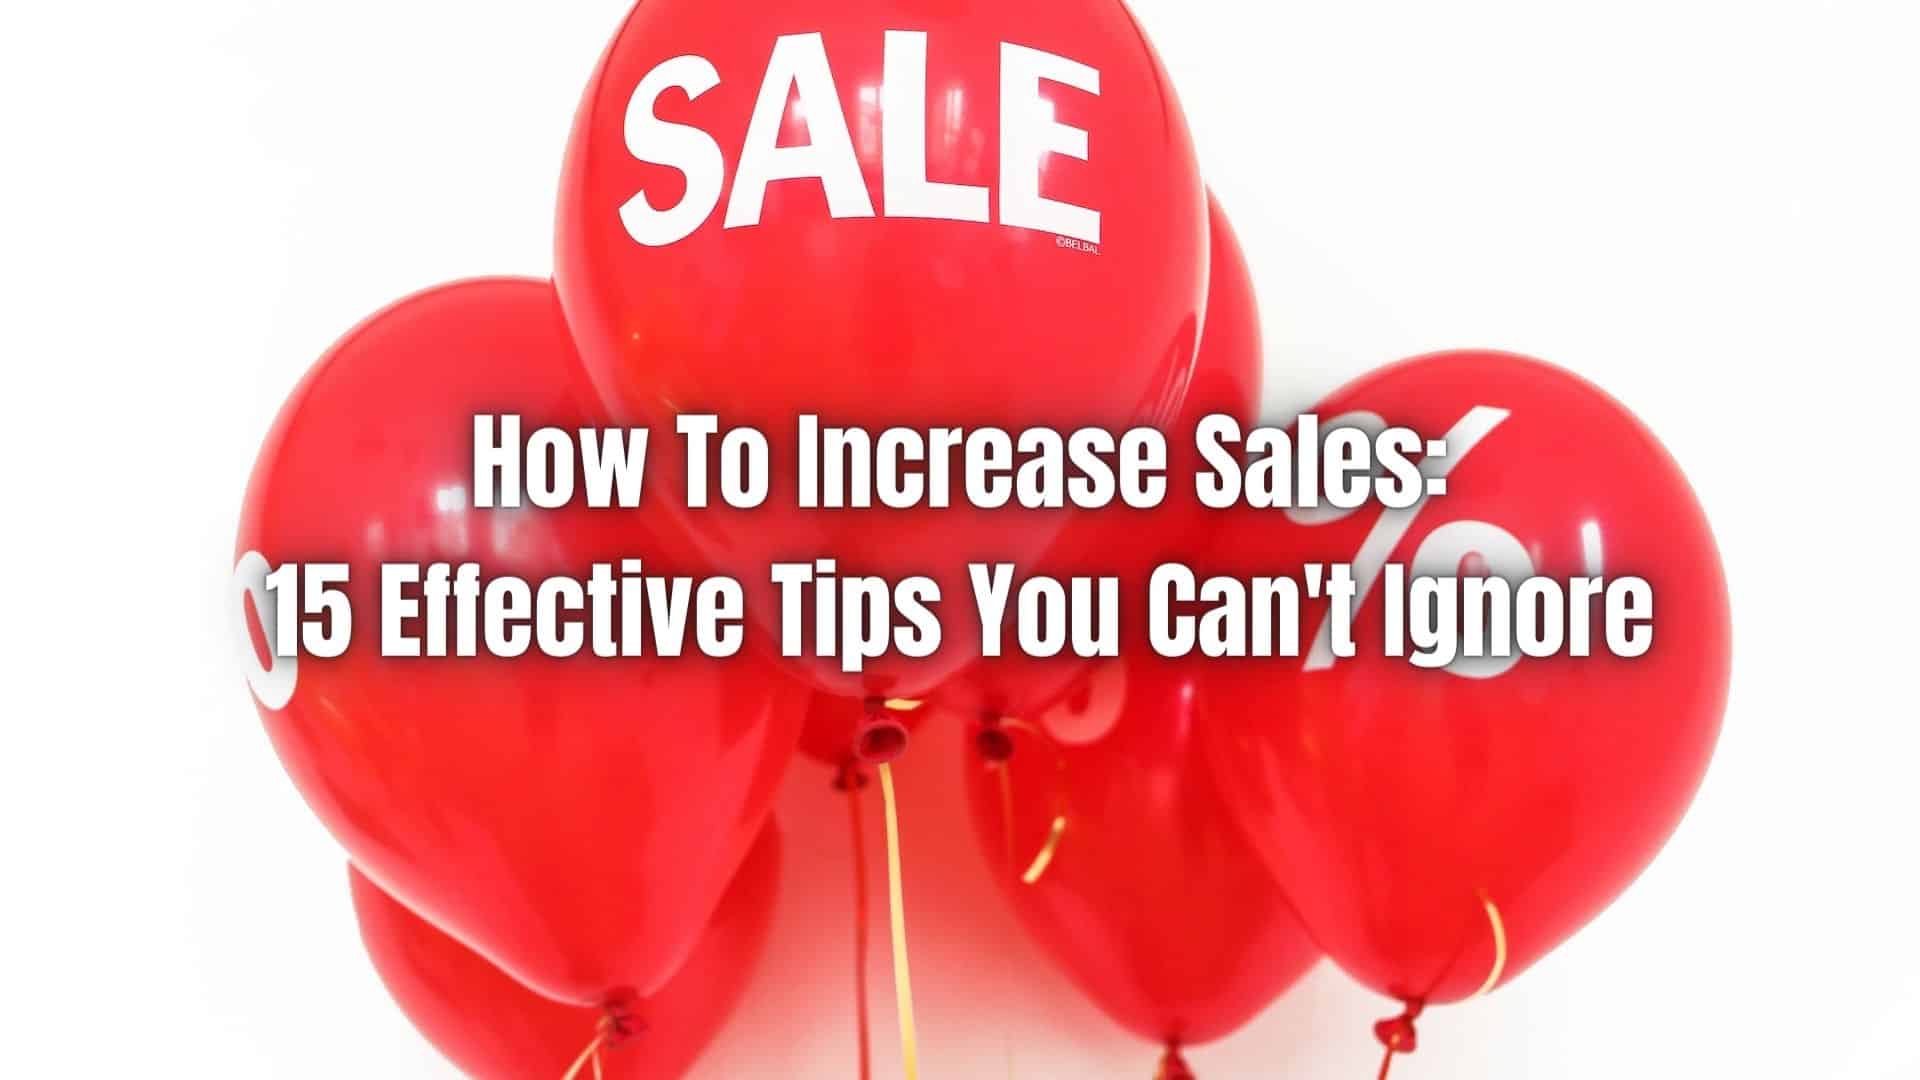 Are you looking for effective ways to increase sales? If so, you're in the right place! Here are 15 effective tips on how to increase sales!